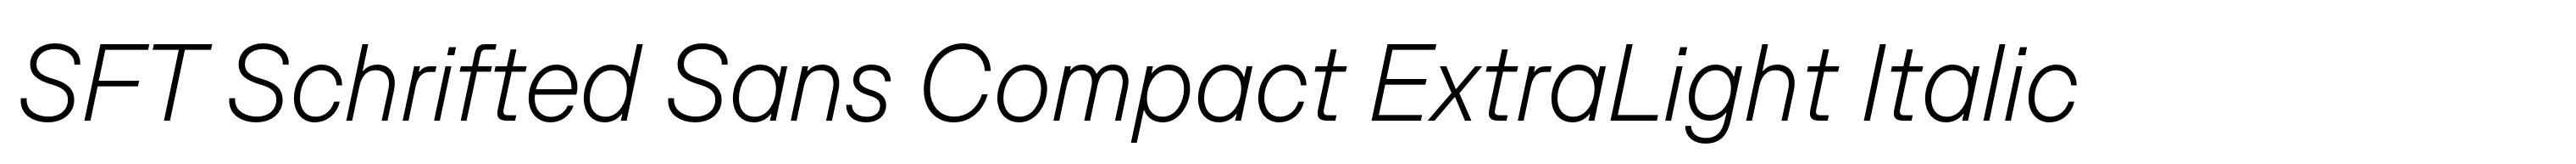 SFT Schrifted Sans Compact ExtraLight Italic